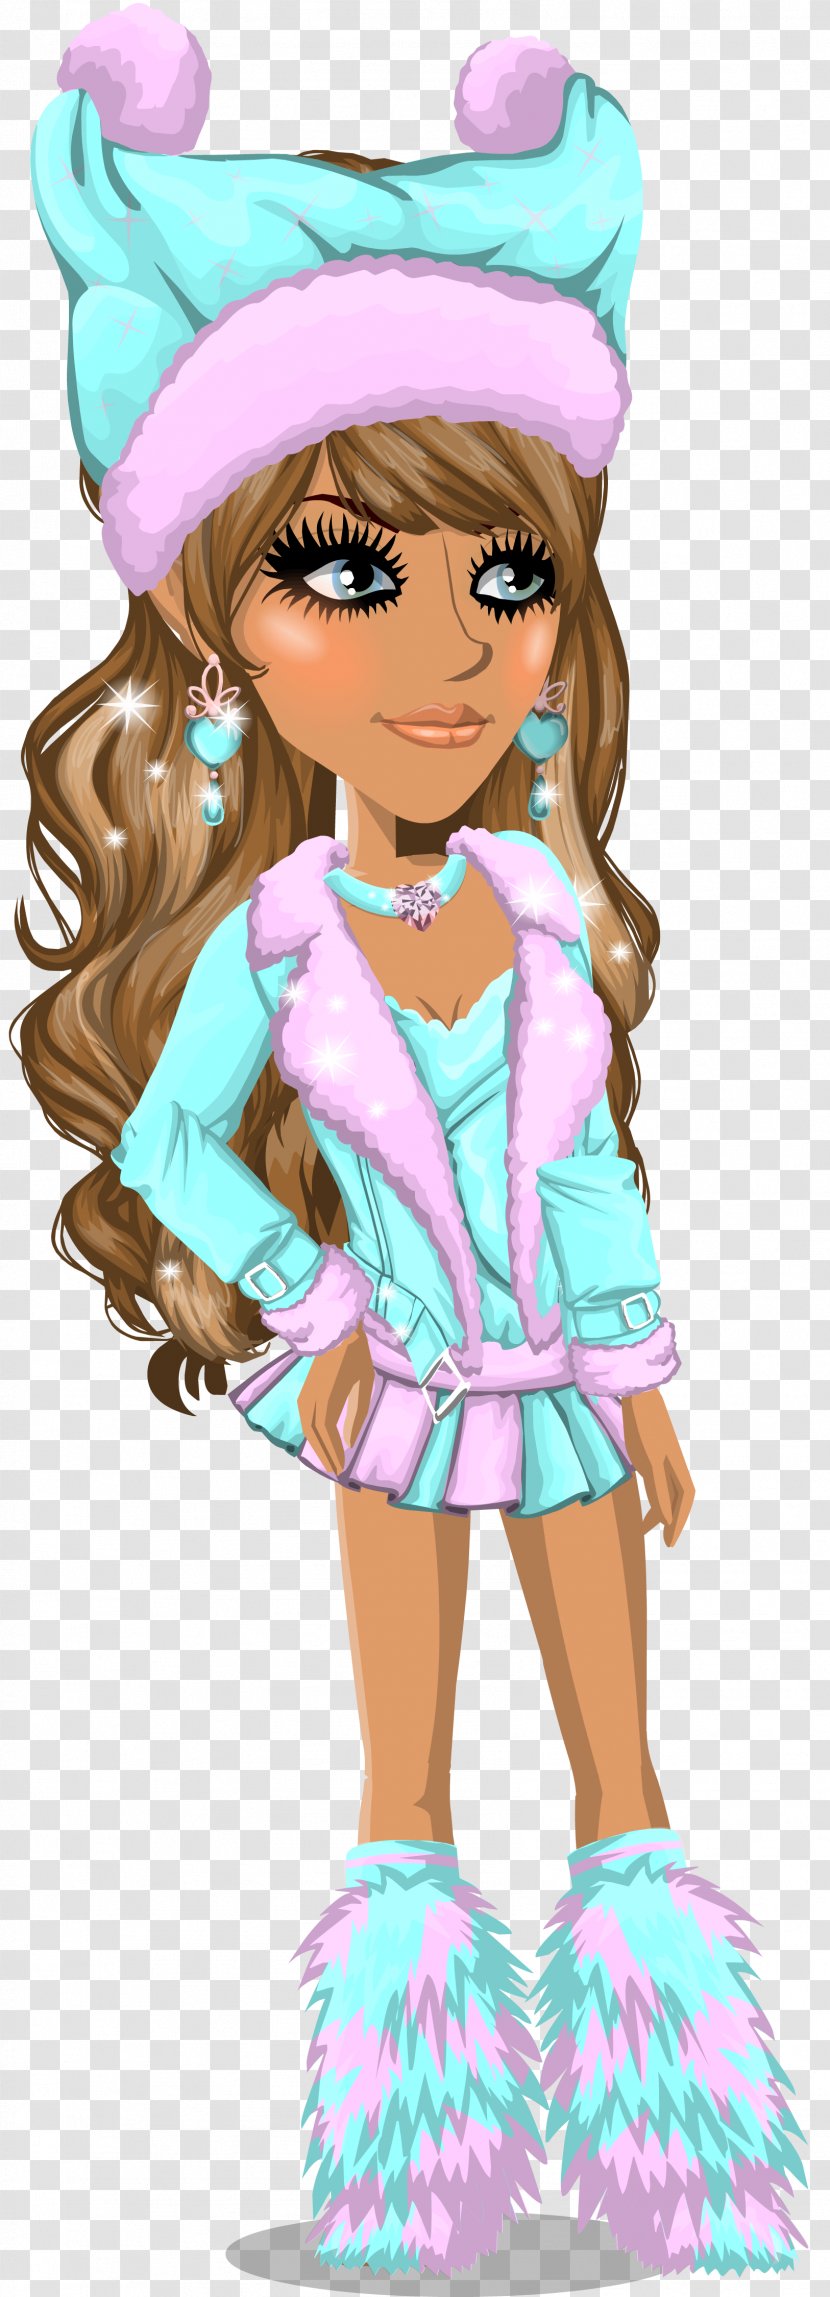 Moviestarplanet Art Doll Drawing - Watercolor - Cotton Candy Transparent PNG